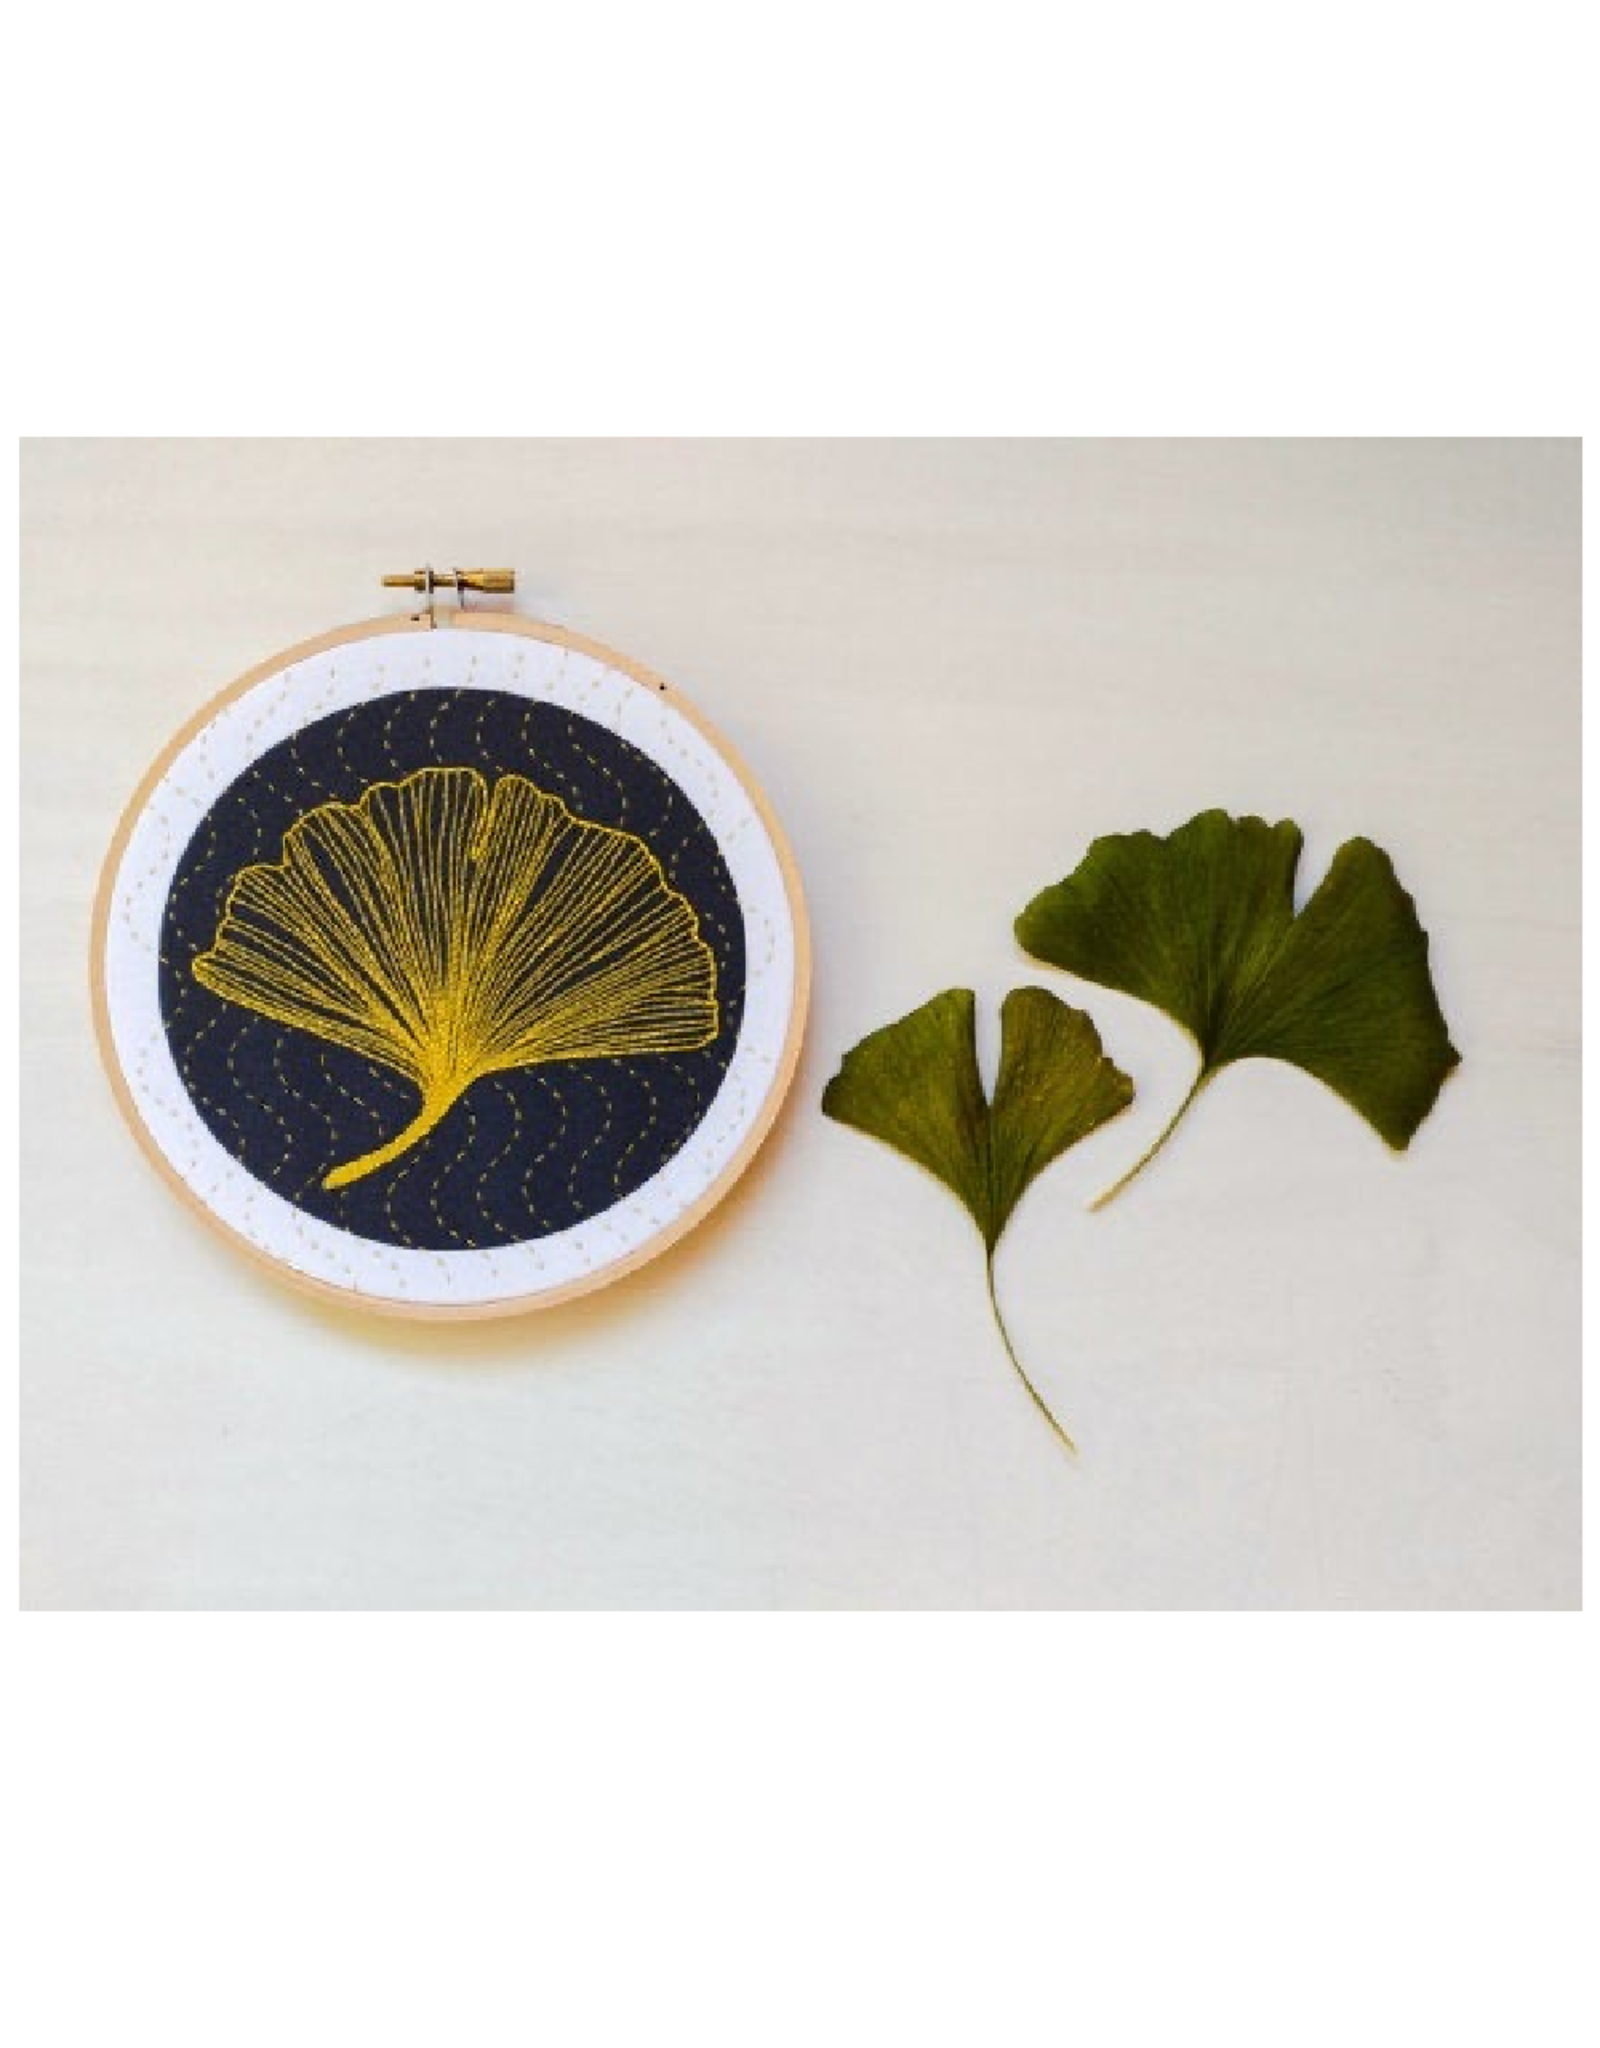 cozyblue Ginkgo Embroidery Kit from cozyblue